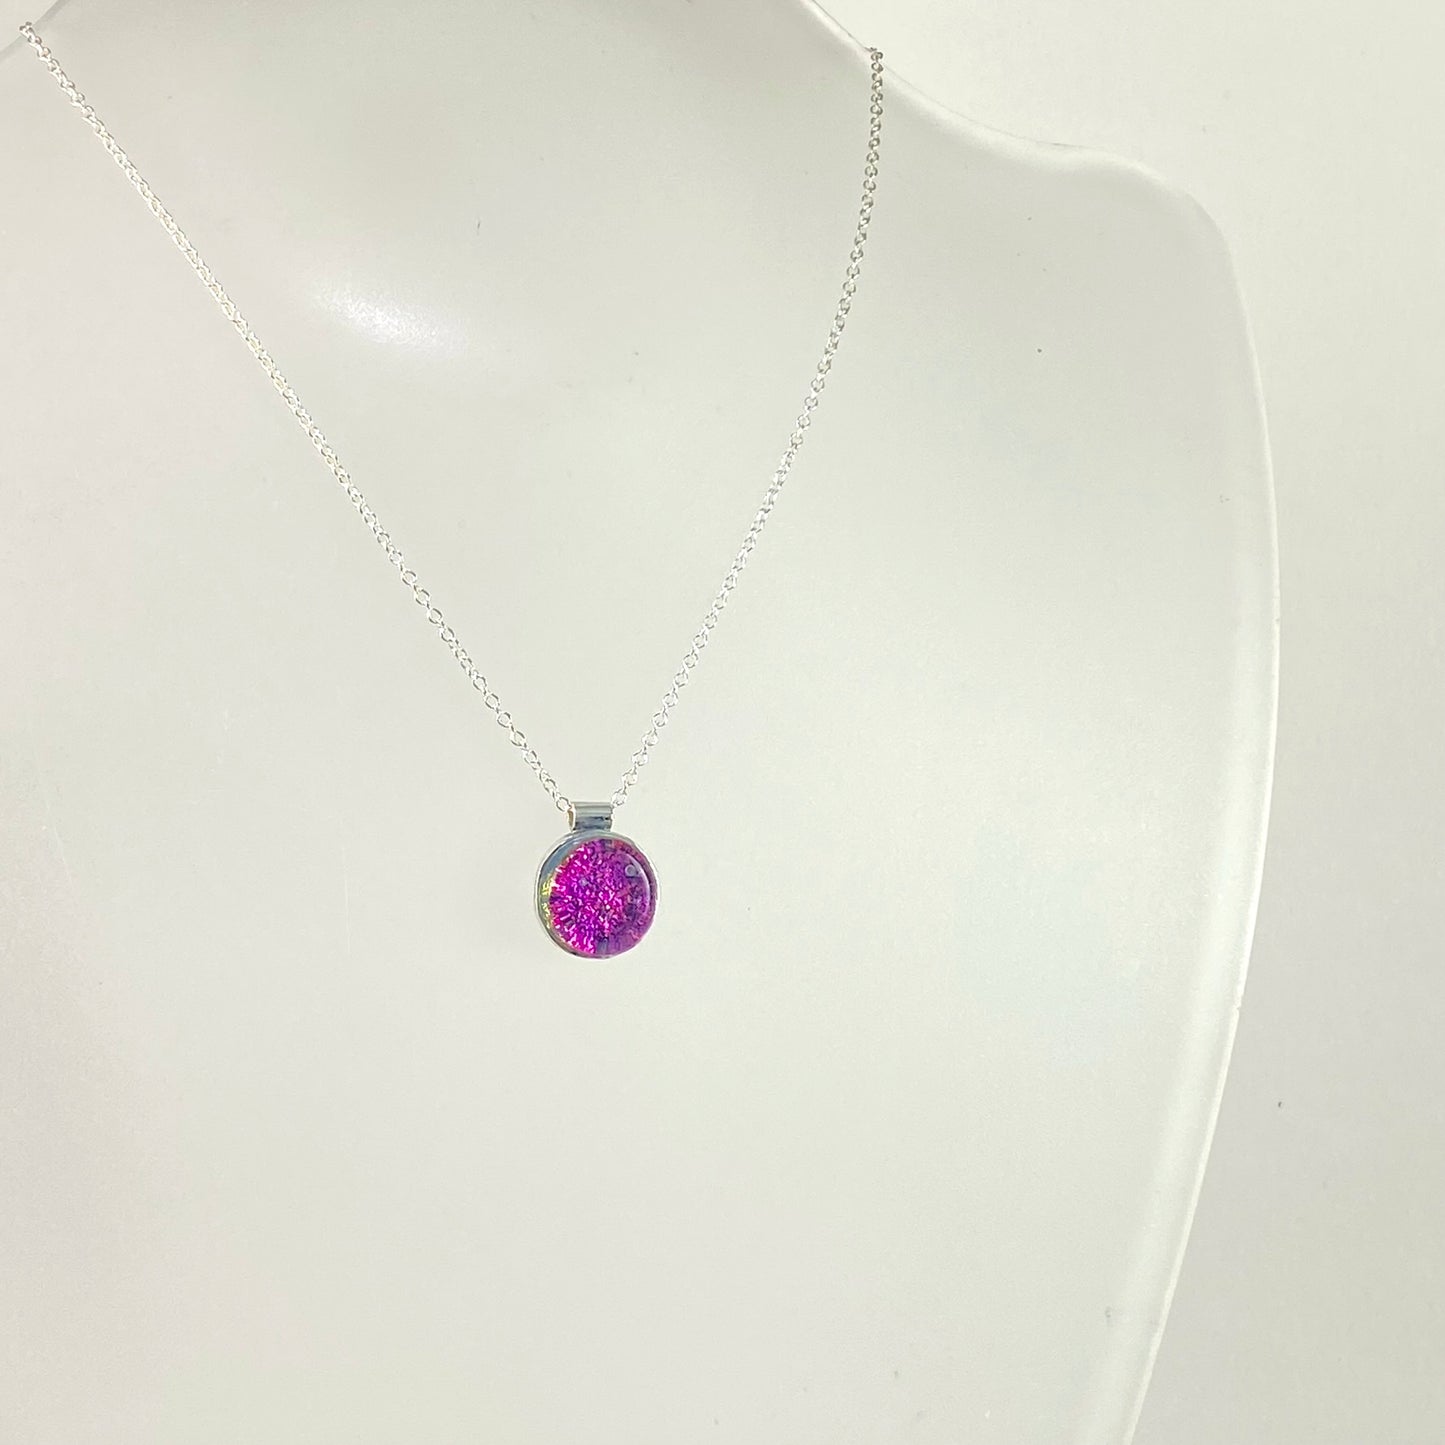 Circle Necklace in Plum